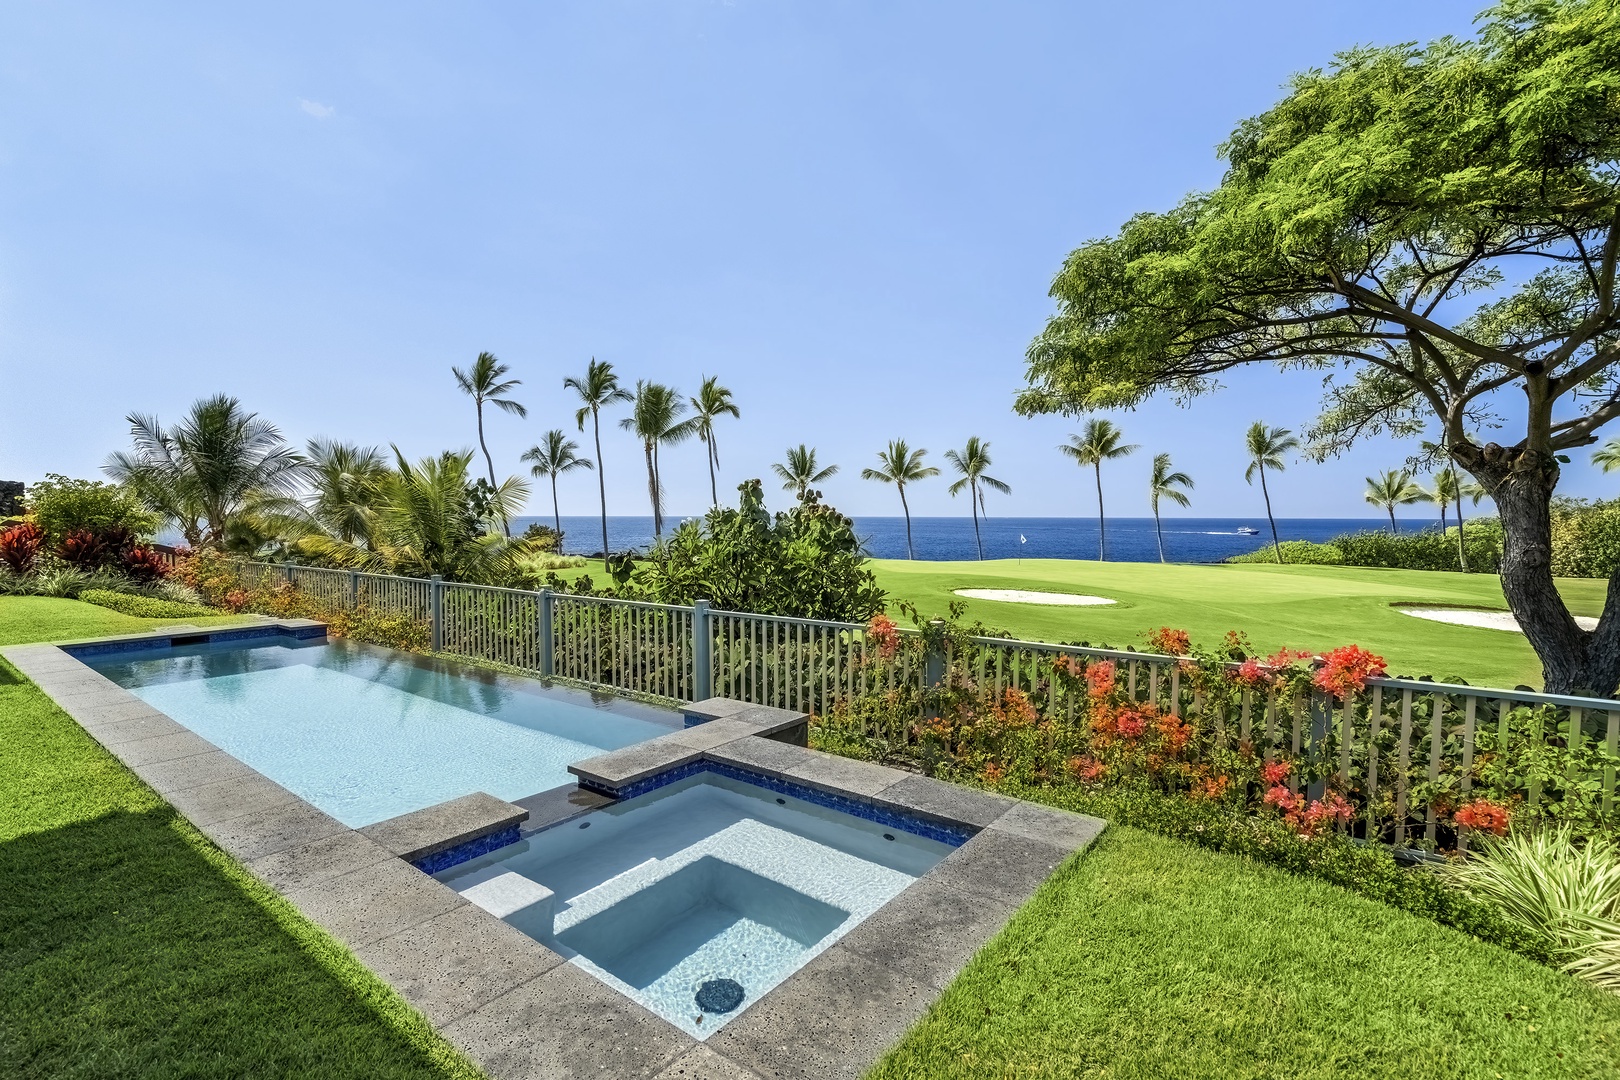 Kailua-Kona Vacation Rentals, Holua Kai #26 - Indulge in a slice of paradise with our ocean view villa from your private pool and spa.